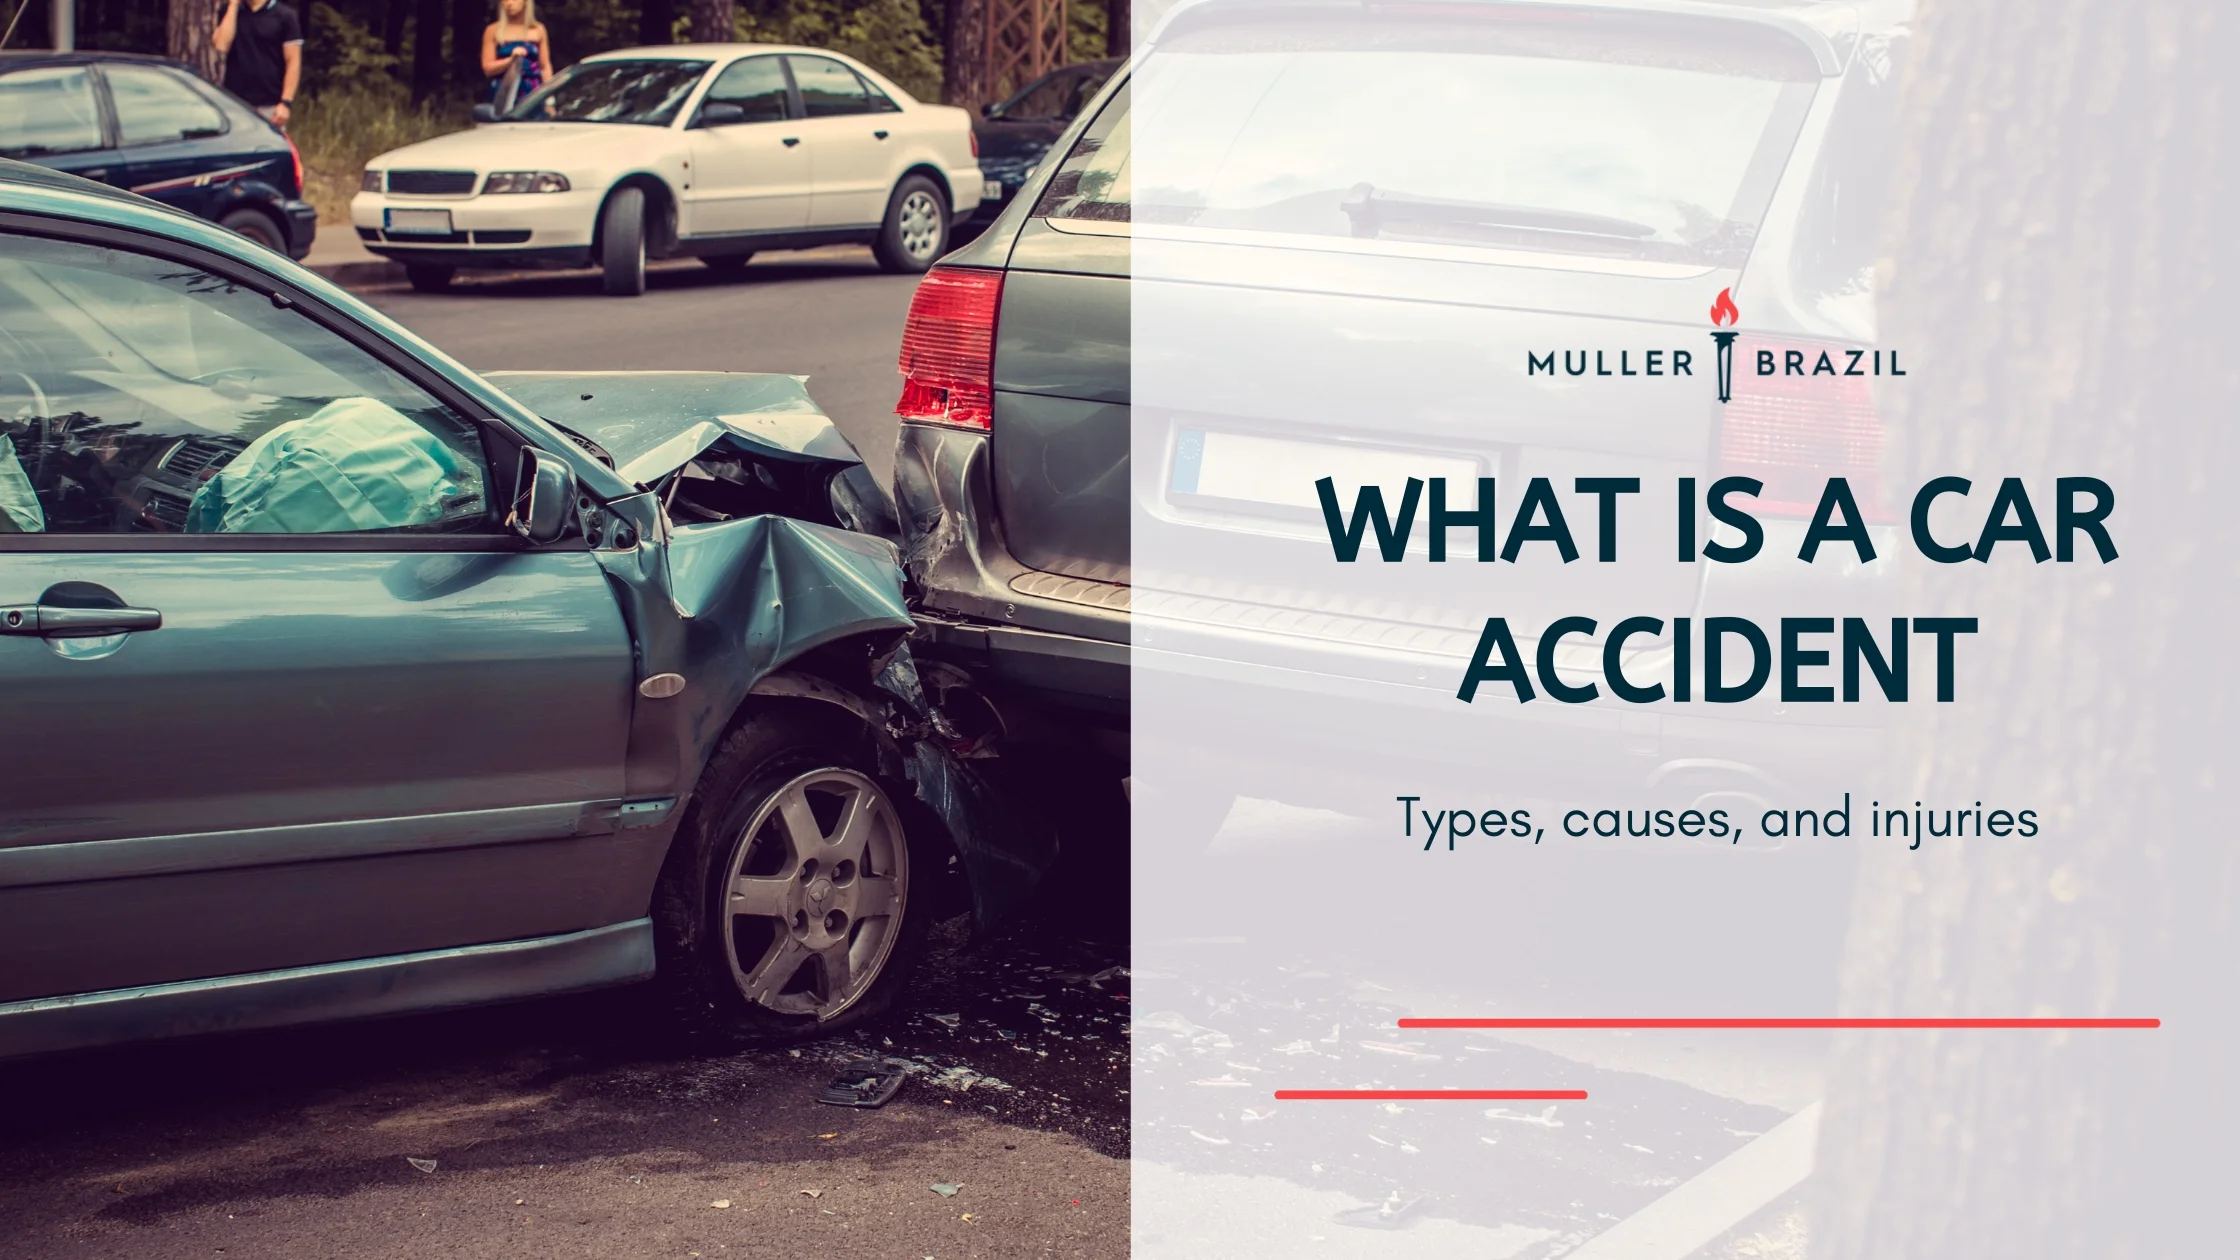 Blog featured image of two black car collision accident and a caption that says “What is a Car Accident